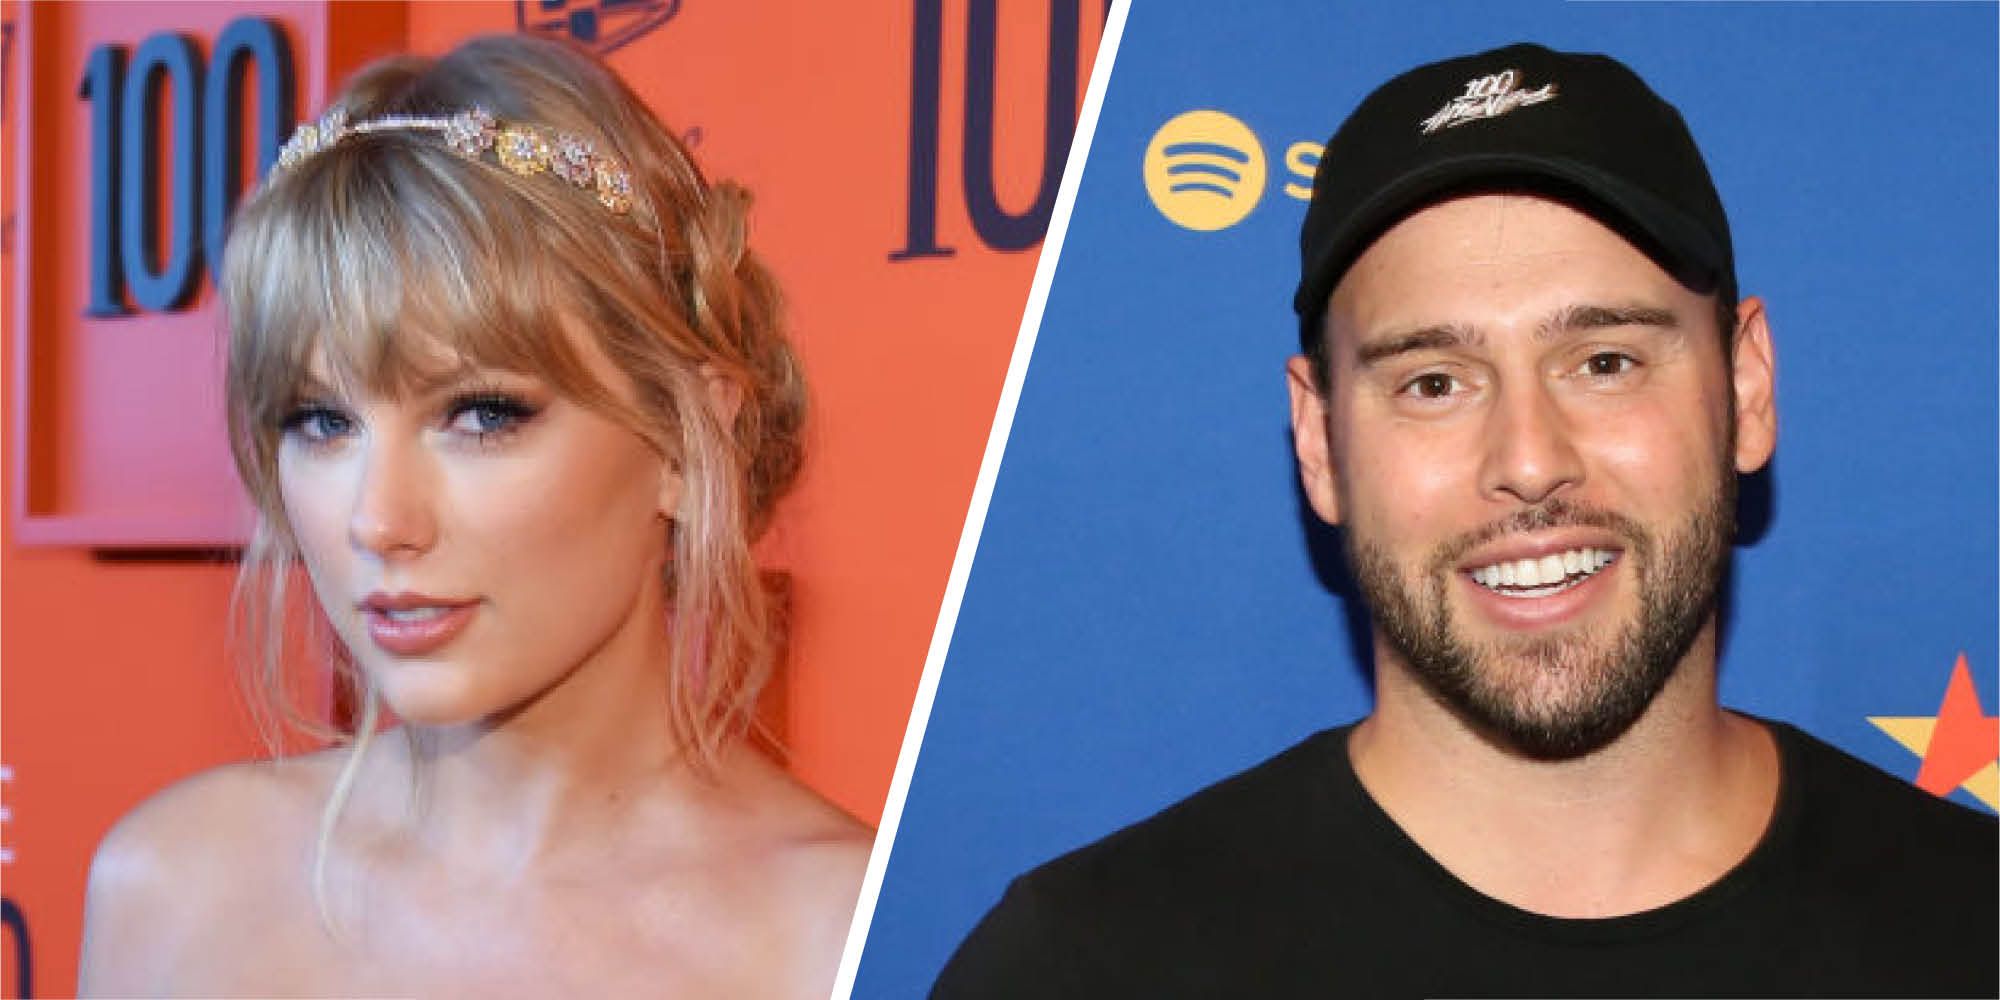 Taylor Swift Sex - Taylor Swift / Scooter Braun feud explainer timeline